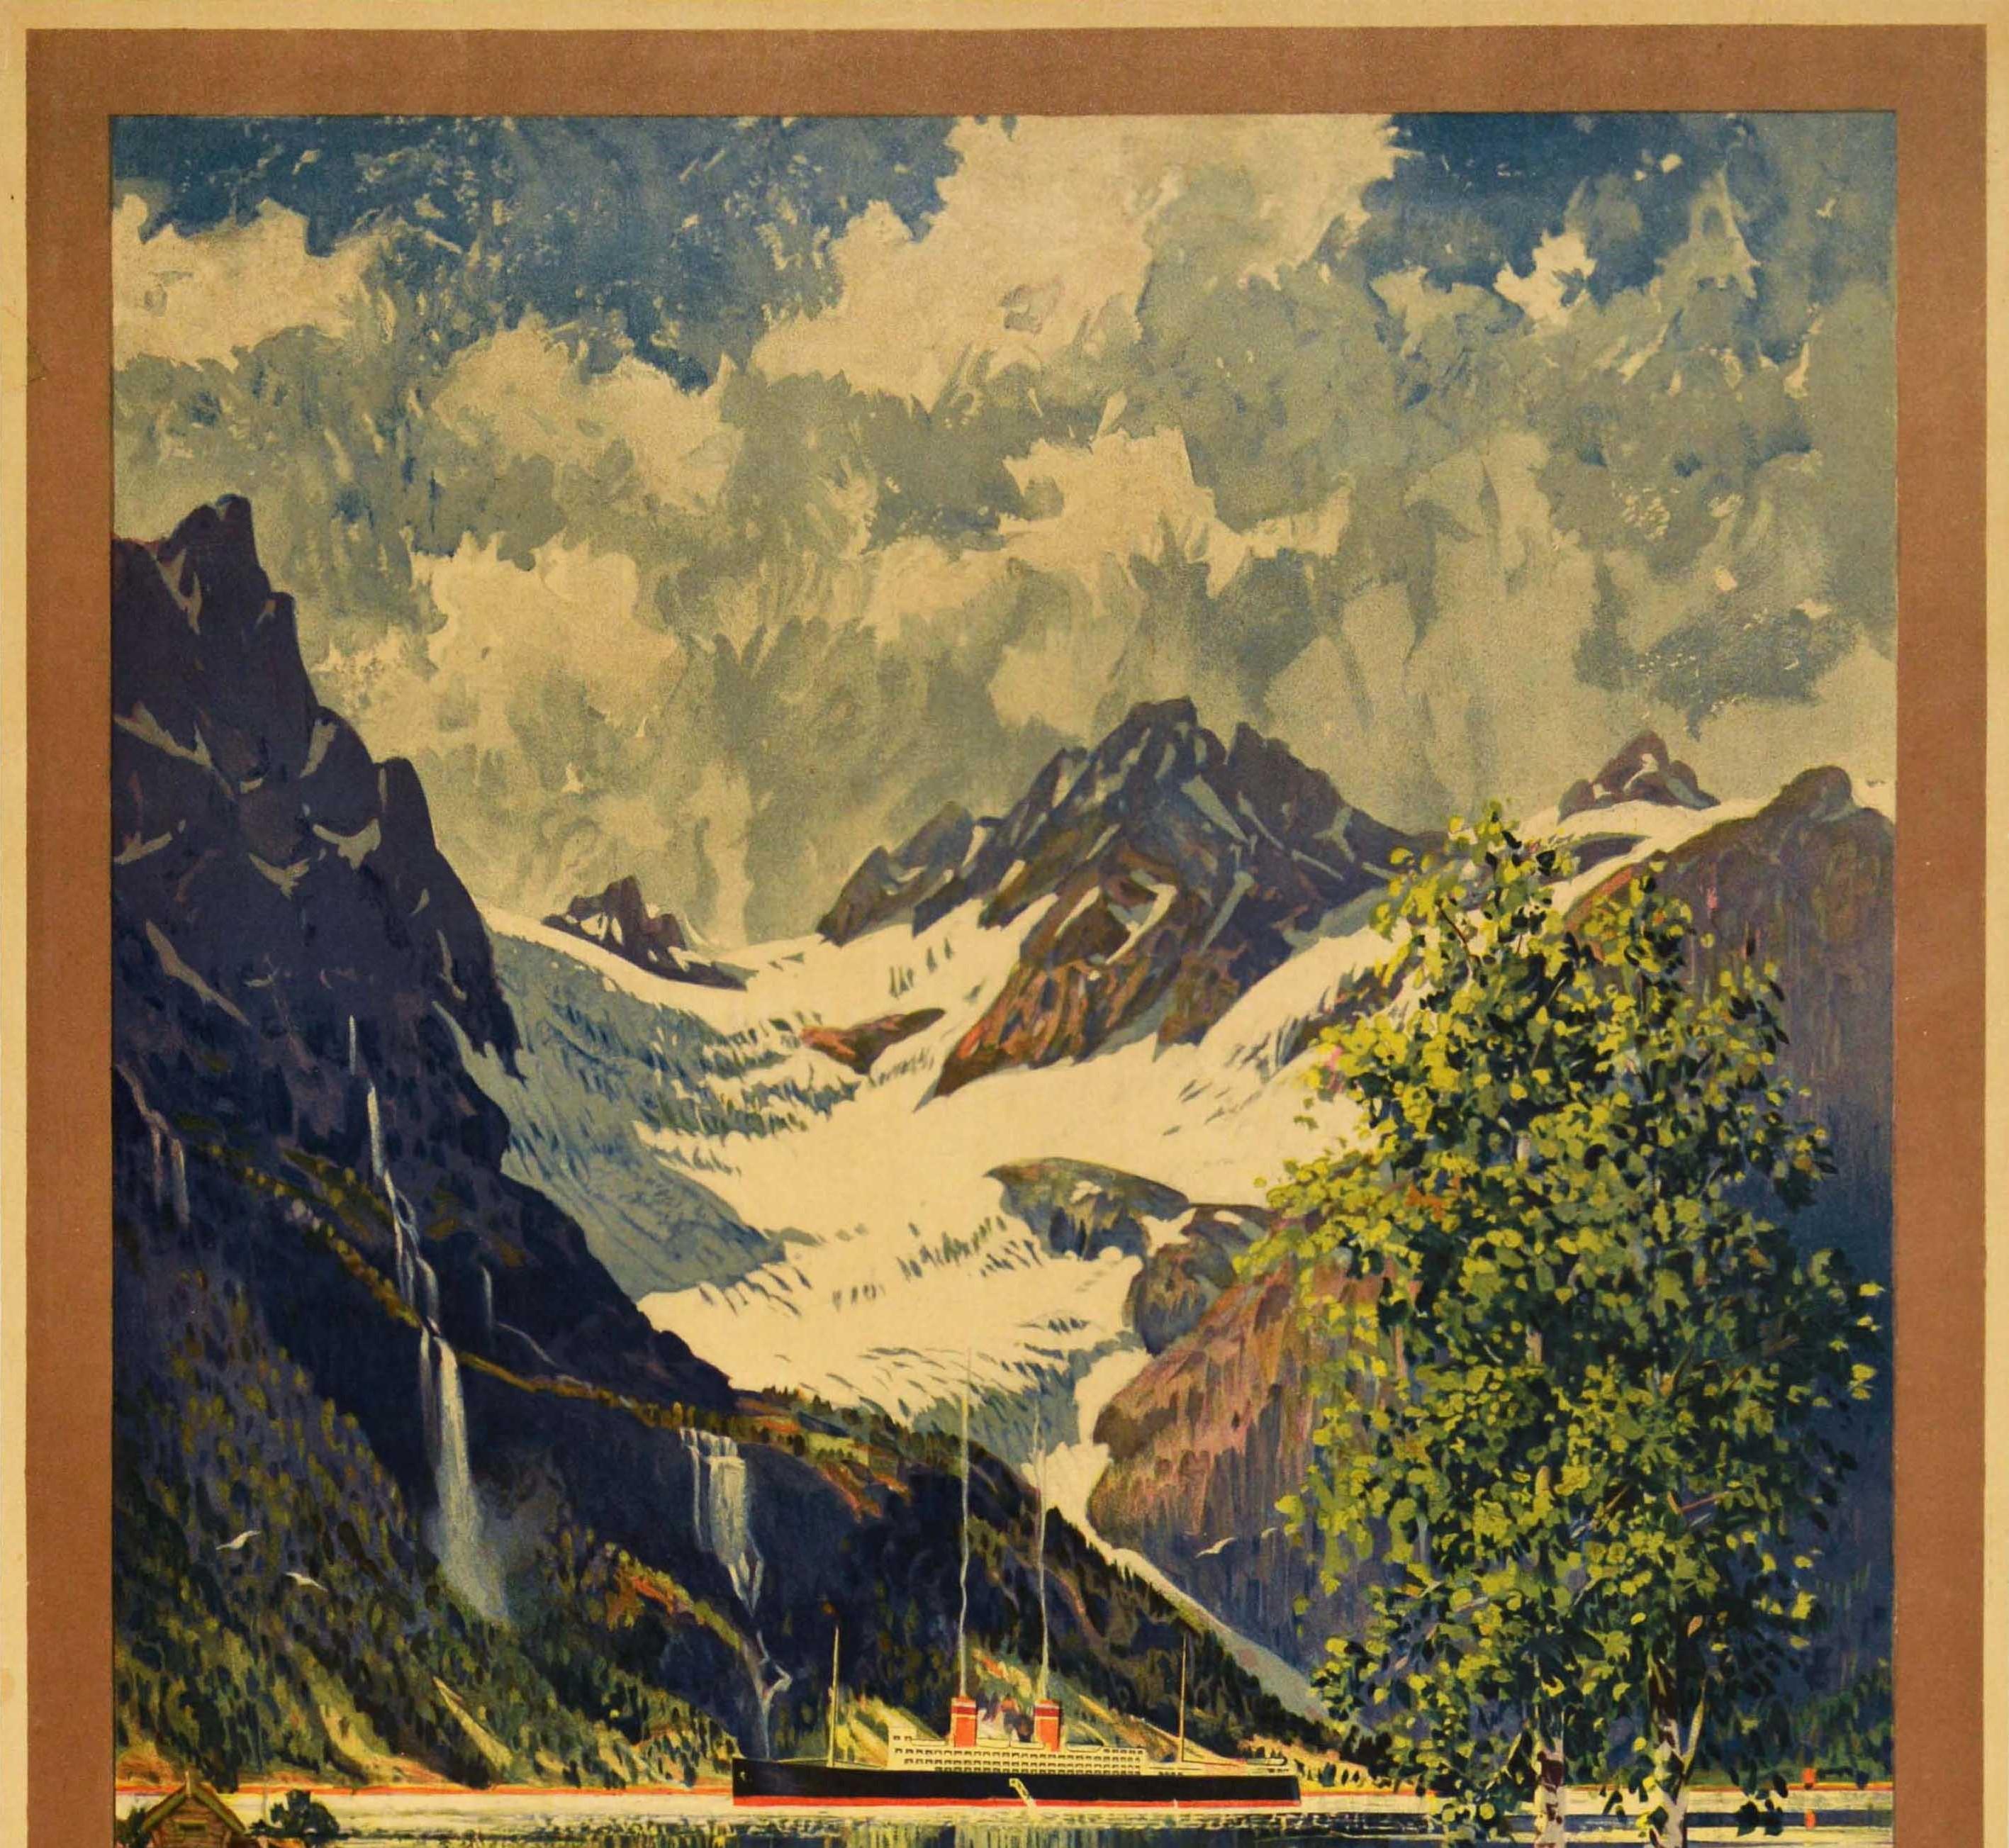 Original vintage railway travel advertising poster for Norway Summer Season June-September featuring great artwork by Benjamin Blessum (1877-1954) depicting a scenic fjord view of the Norwegian landscape showing a lake in the foreground with wooden